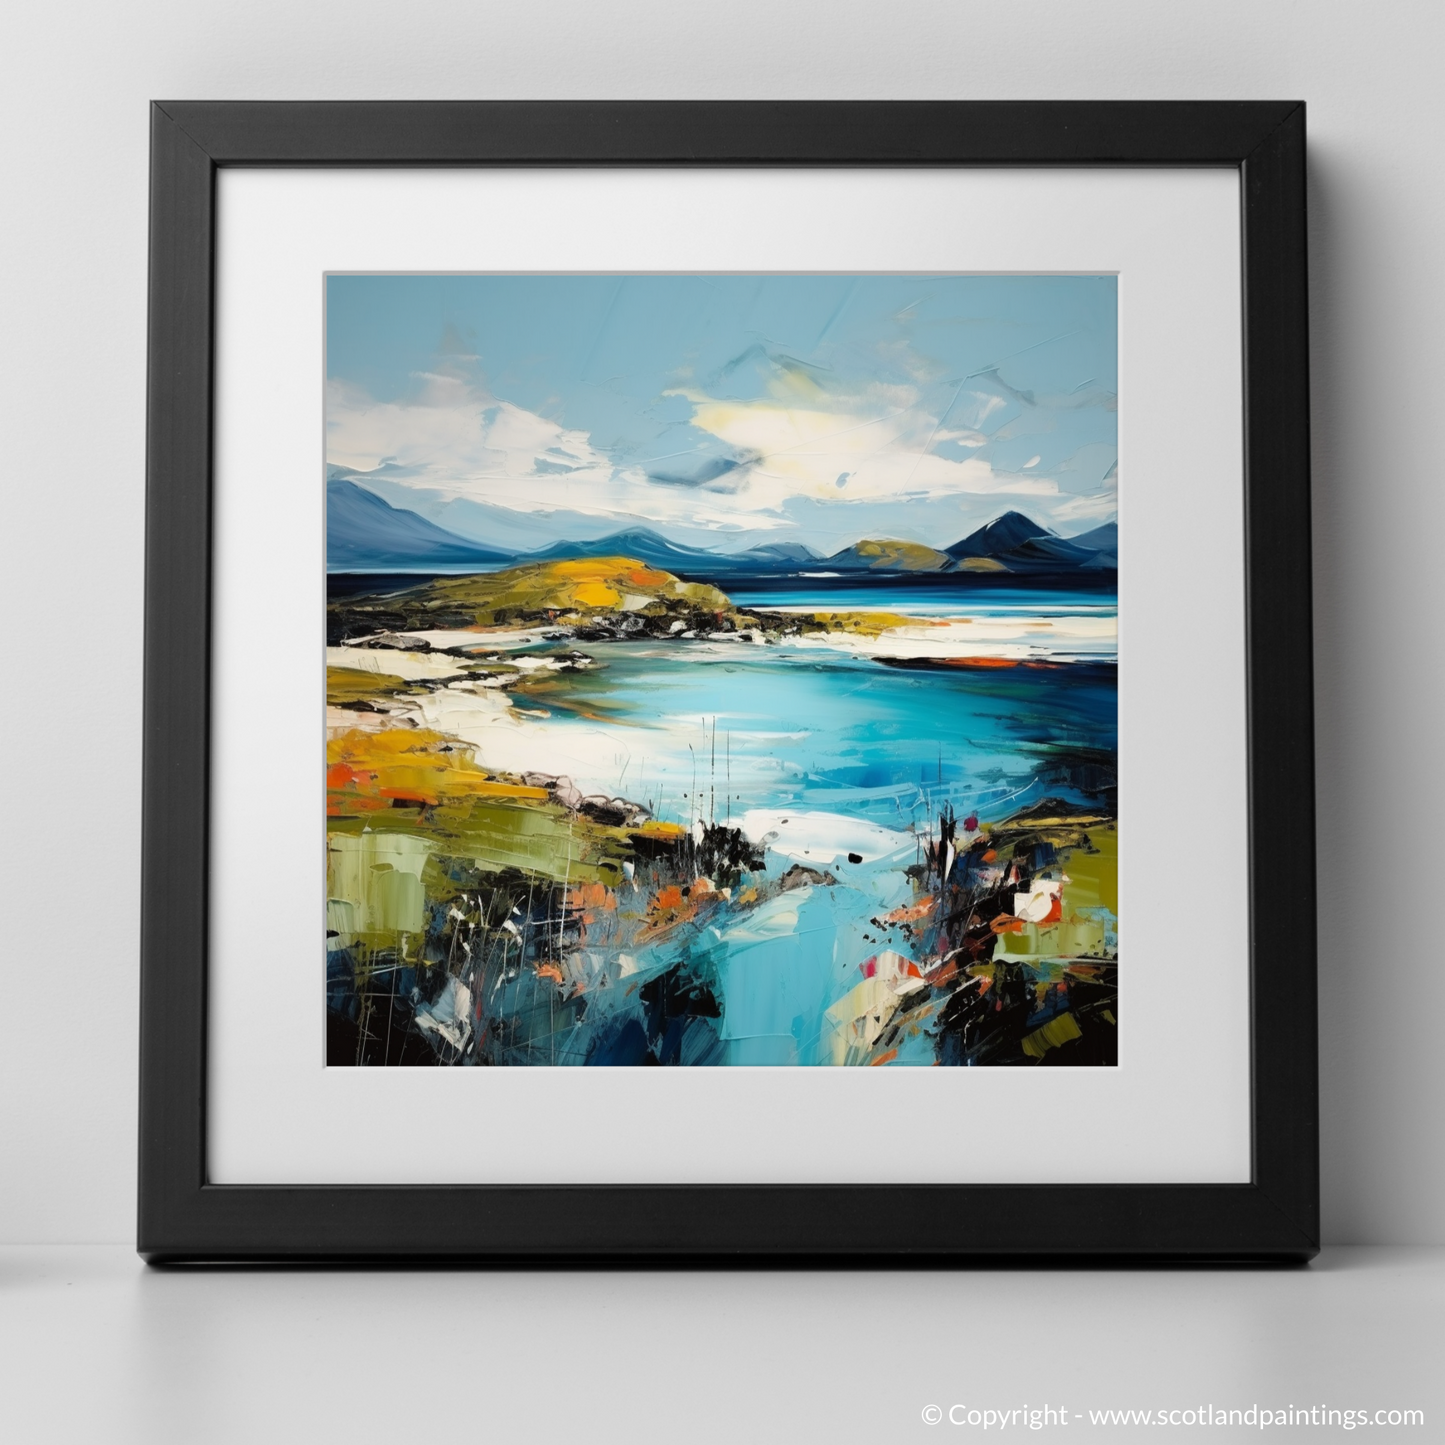 Art Print of Isle of Barra, Outer Hebrides with a black frame